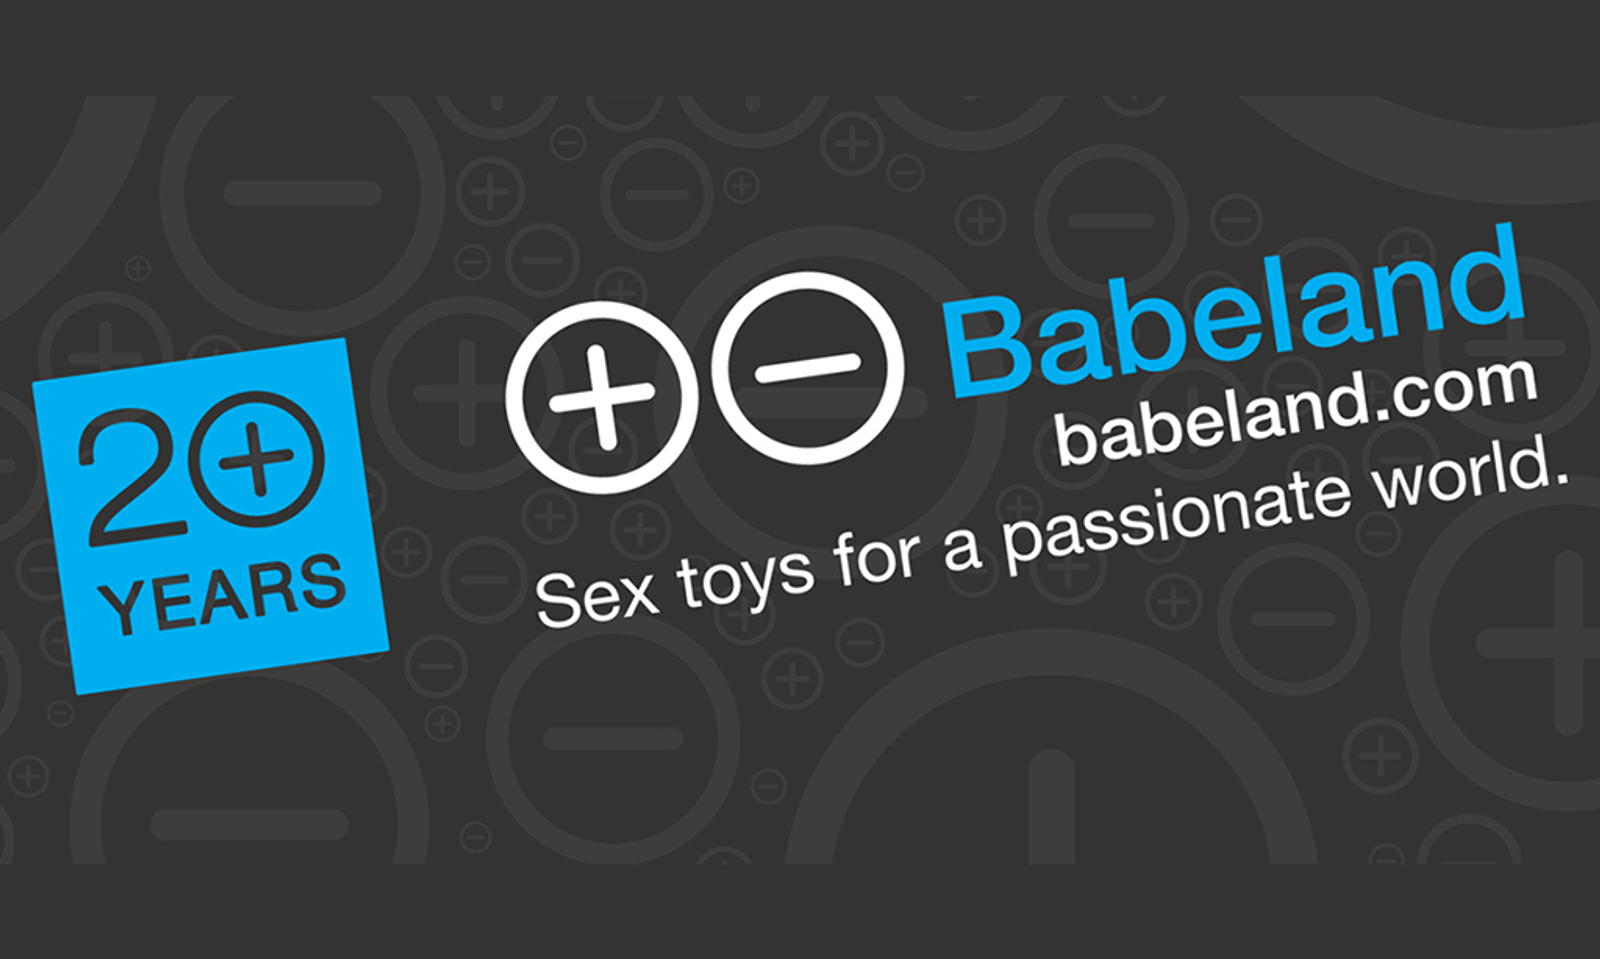 Babeland Asks Customers' Views, Experiences With Non-Monogamy